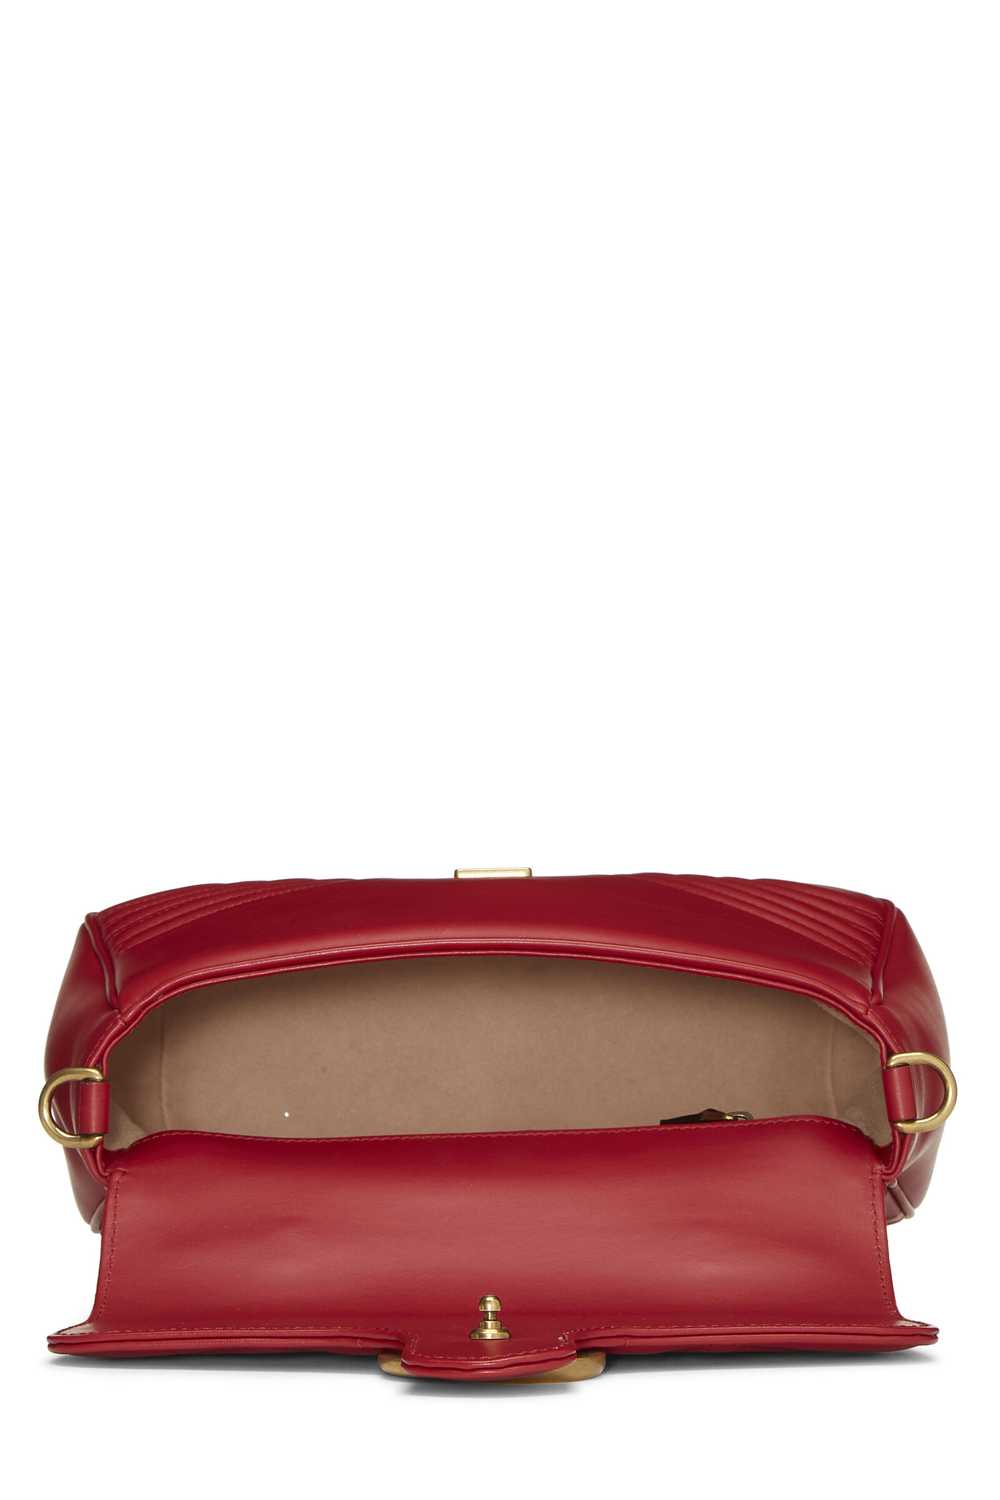 Red Leather GG Marmont Top Handle Bag Small - image 6